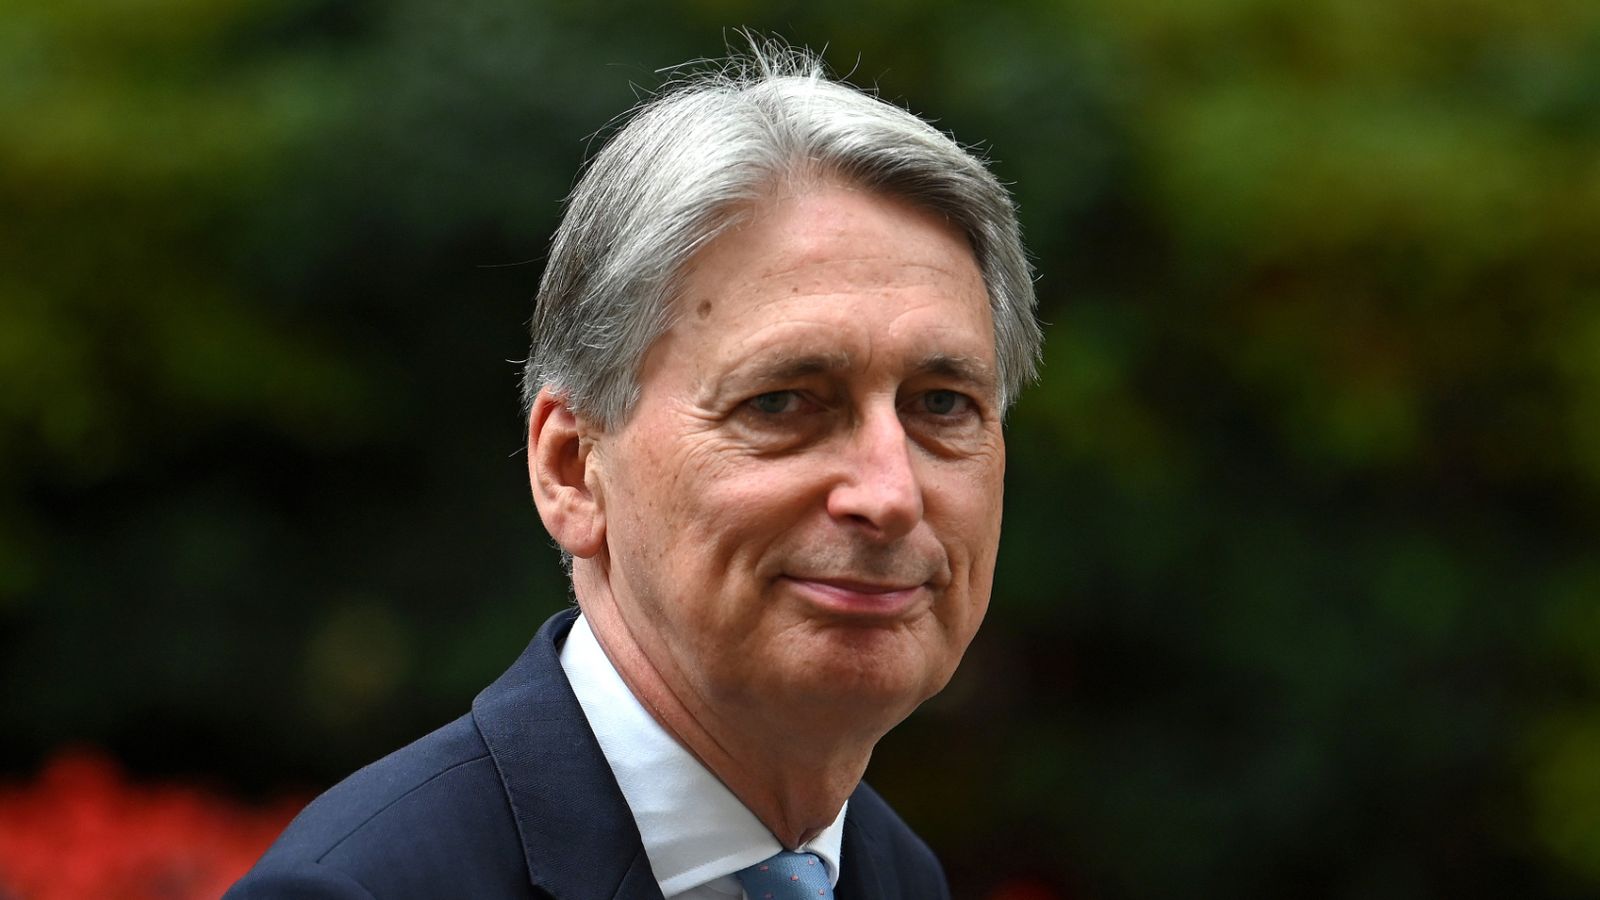 Ex-chancellor Philip Hammond says he would not have accepted job if taxes were under investigation